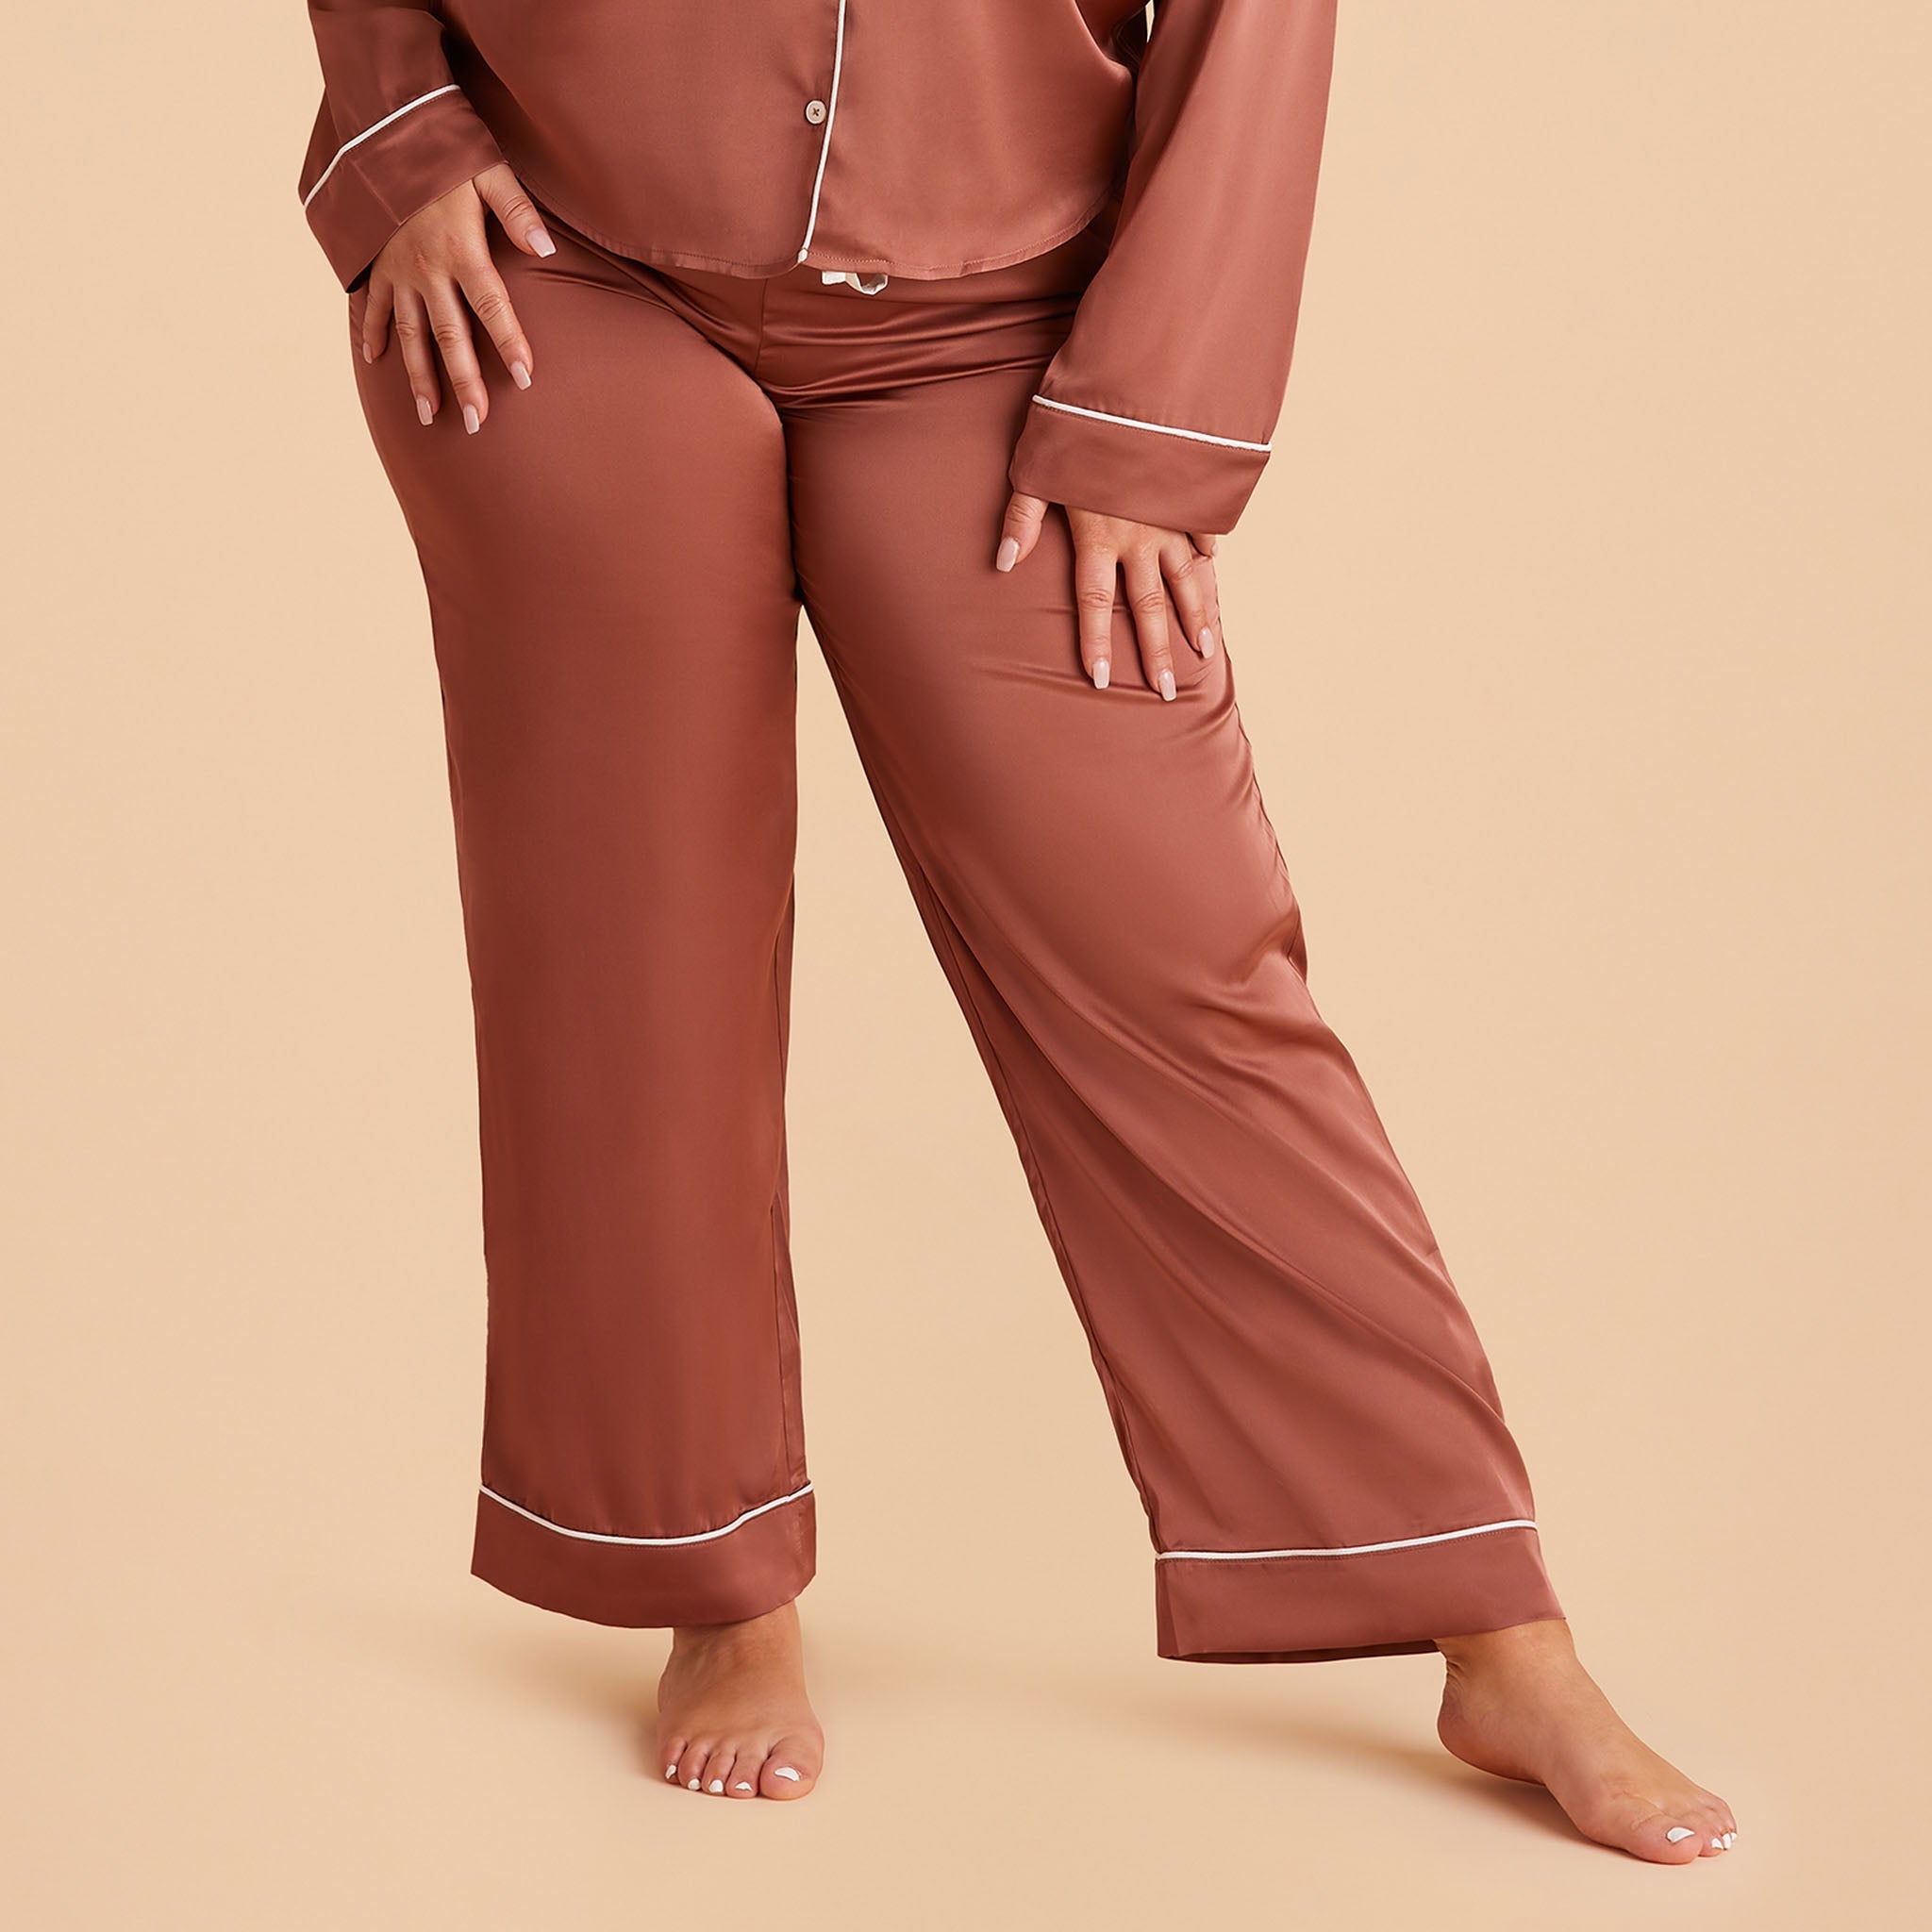 Jonny Plus Size Satin Pants Bridesmaid Pajamas With White Piping in Desert Rose, front view